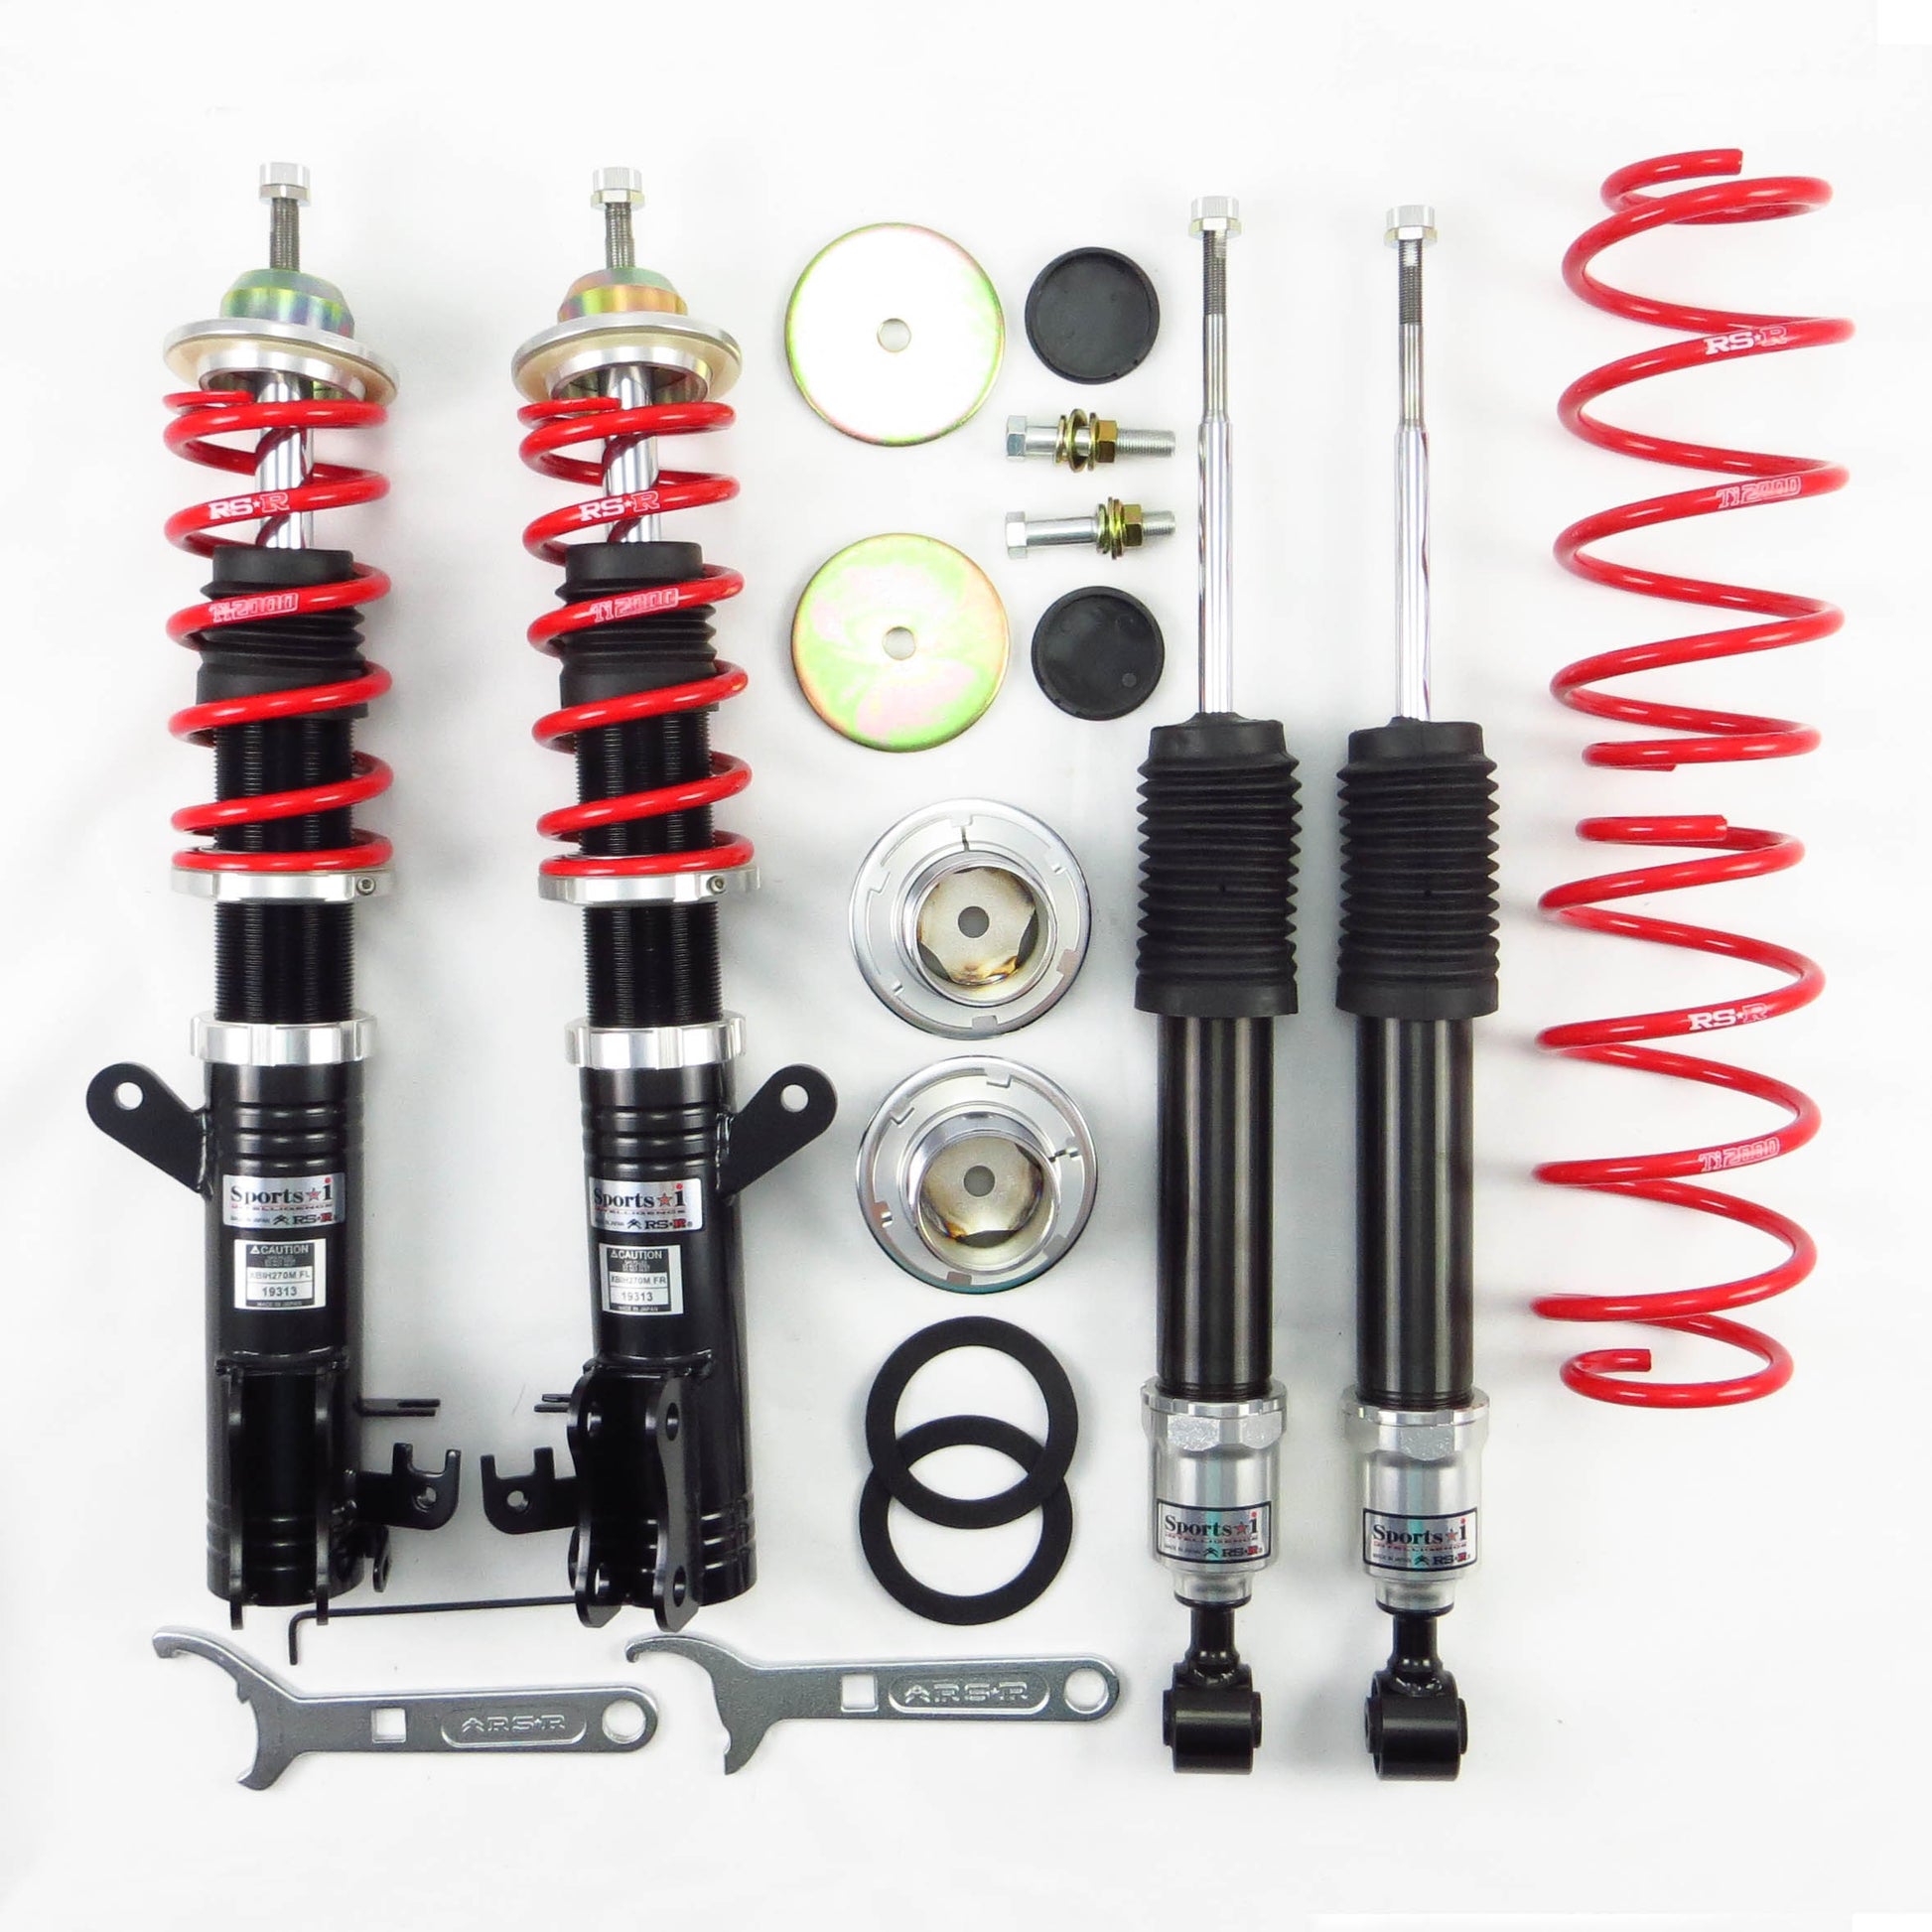 HONDA FIT SPORTS-I COILOVERS 2009-2013